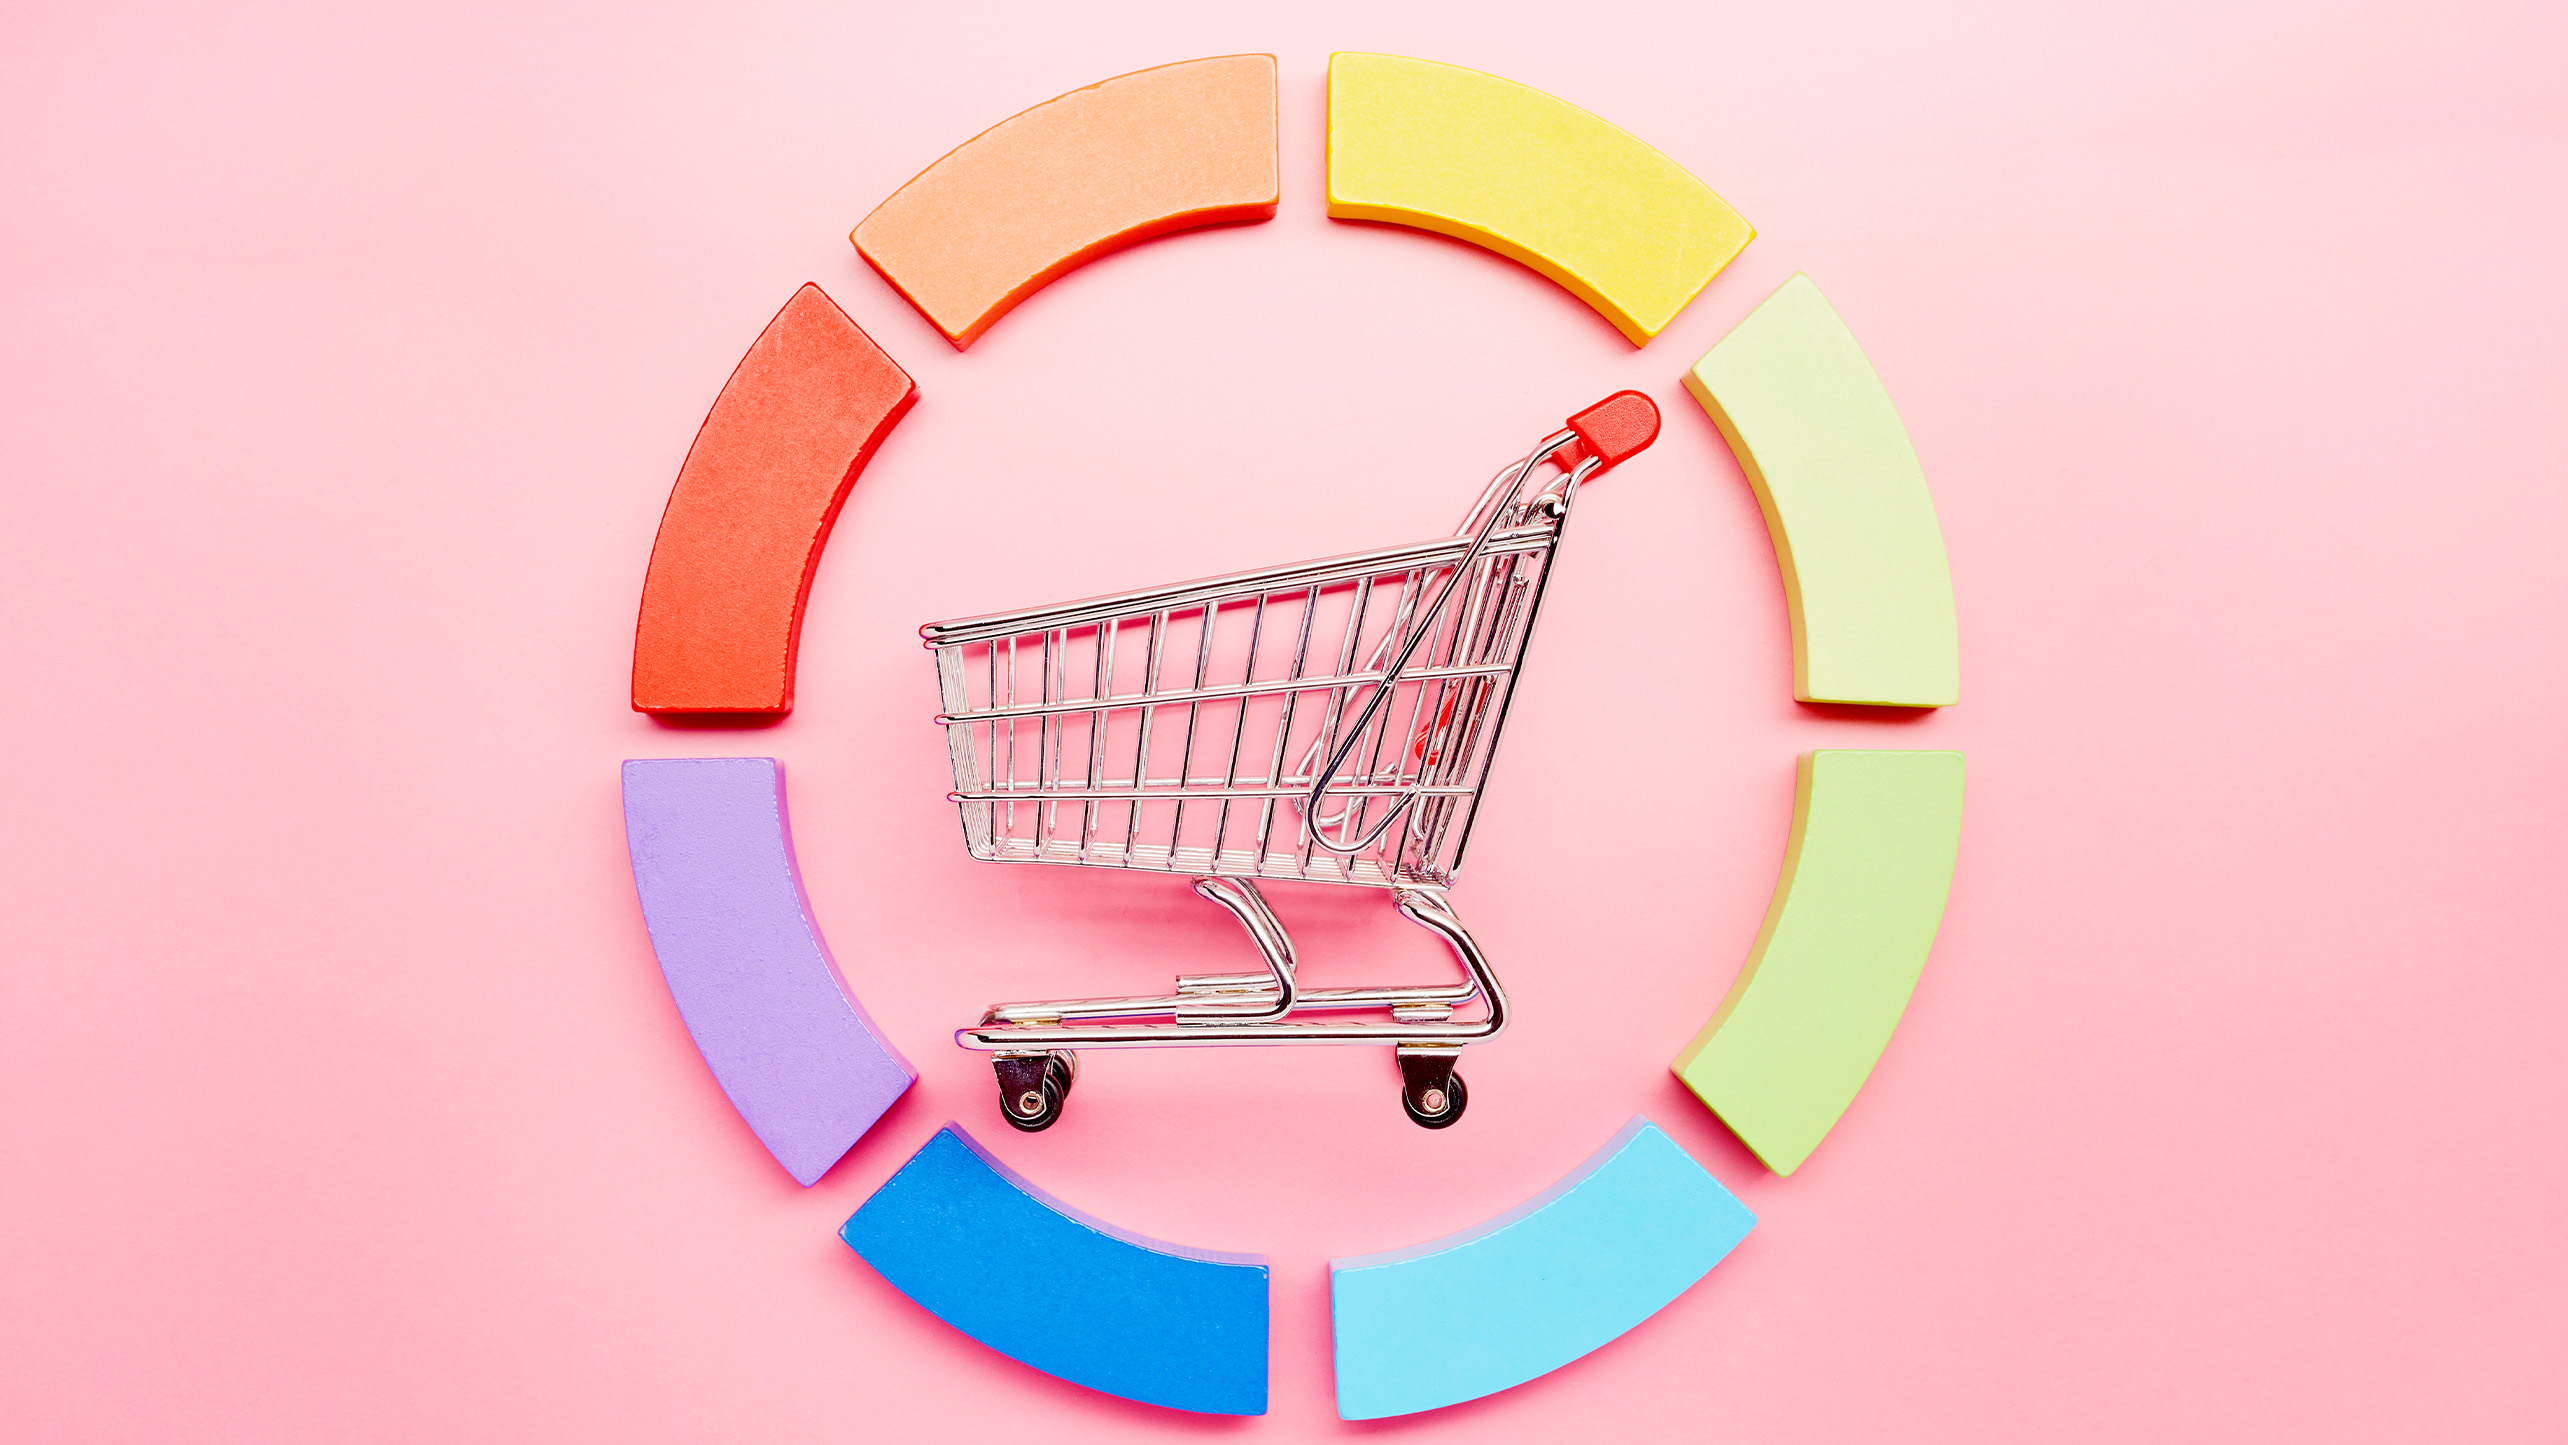 Pie chart made of colourful building blocks and a small shopping cart on pink background